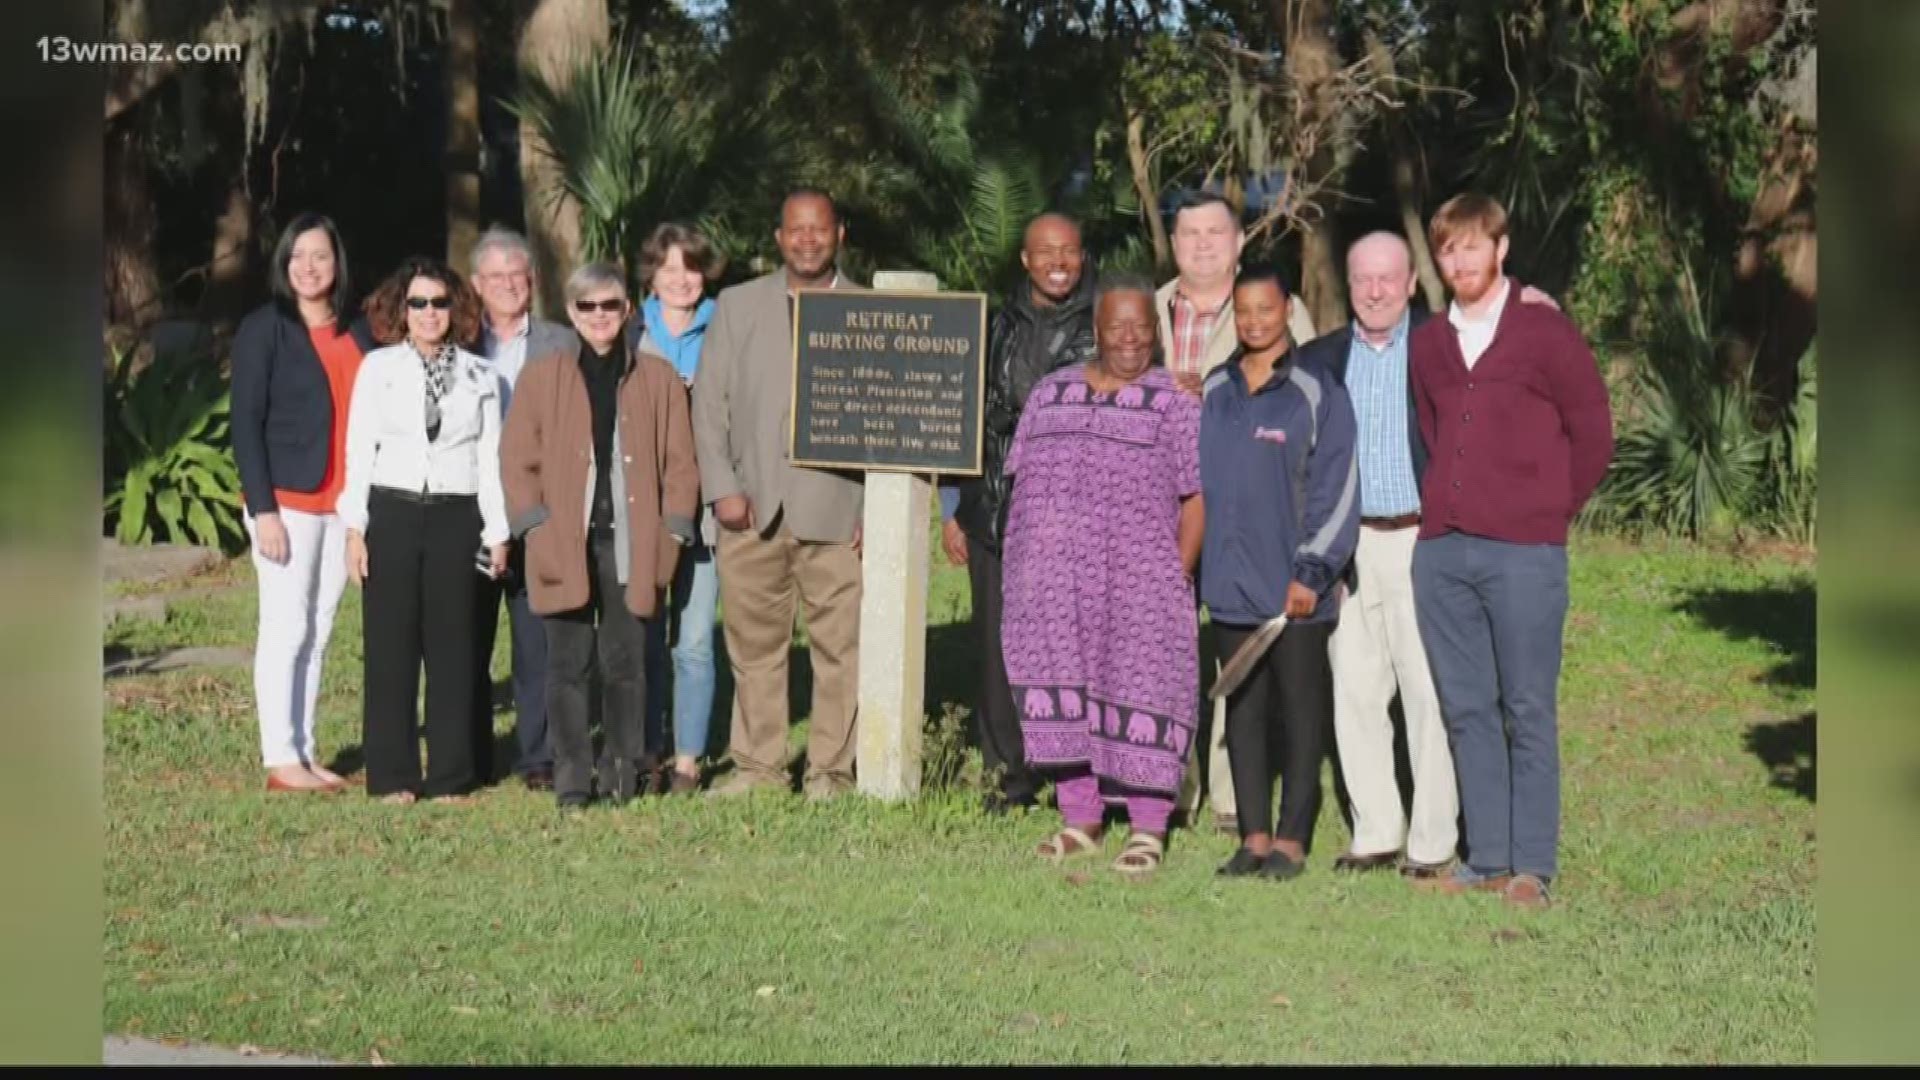 The $2,000 grant will allow students to continue to interview descendants of slaves on St. Simons Island and other places in Georgia